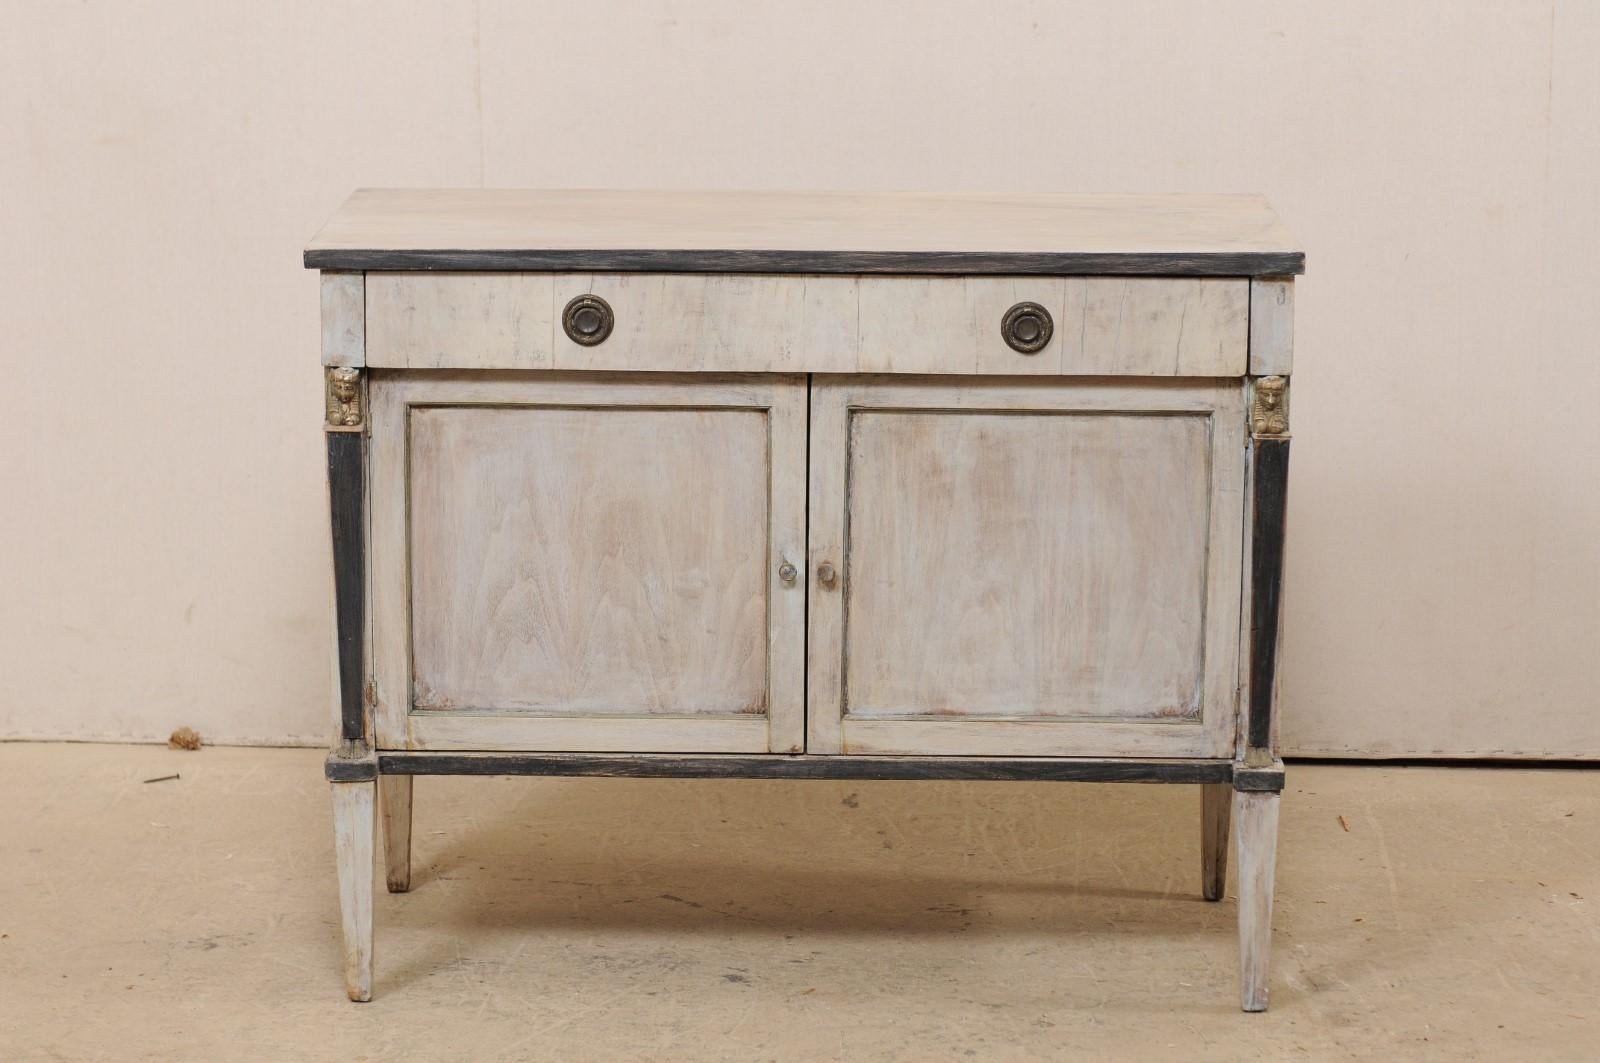 A French neoclassical style smaller-sized, raised buffet cabinet from the early 20th century. This antique cabinet from France features a rectangular-shaped top above a case designed with clean lines and column-style side posts flanking the doors